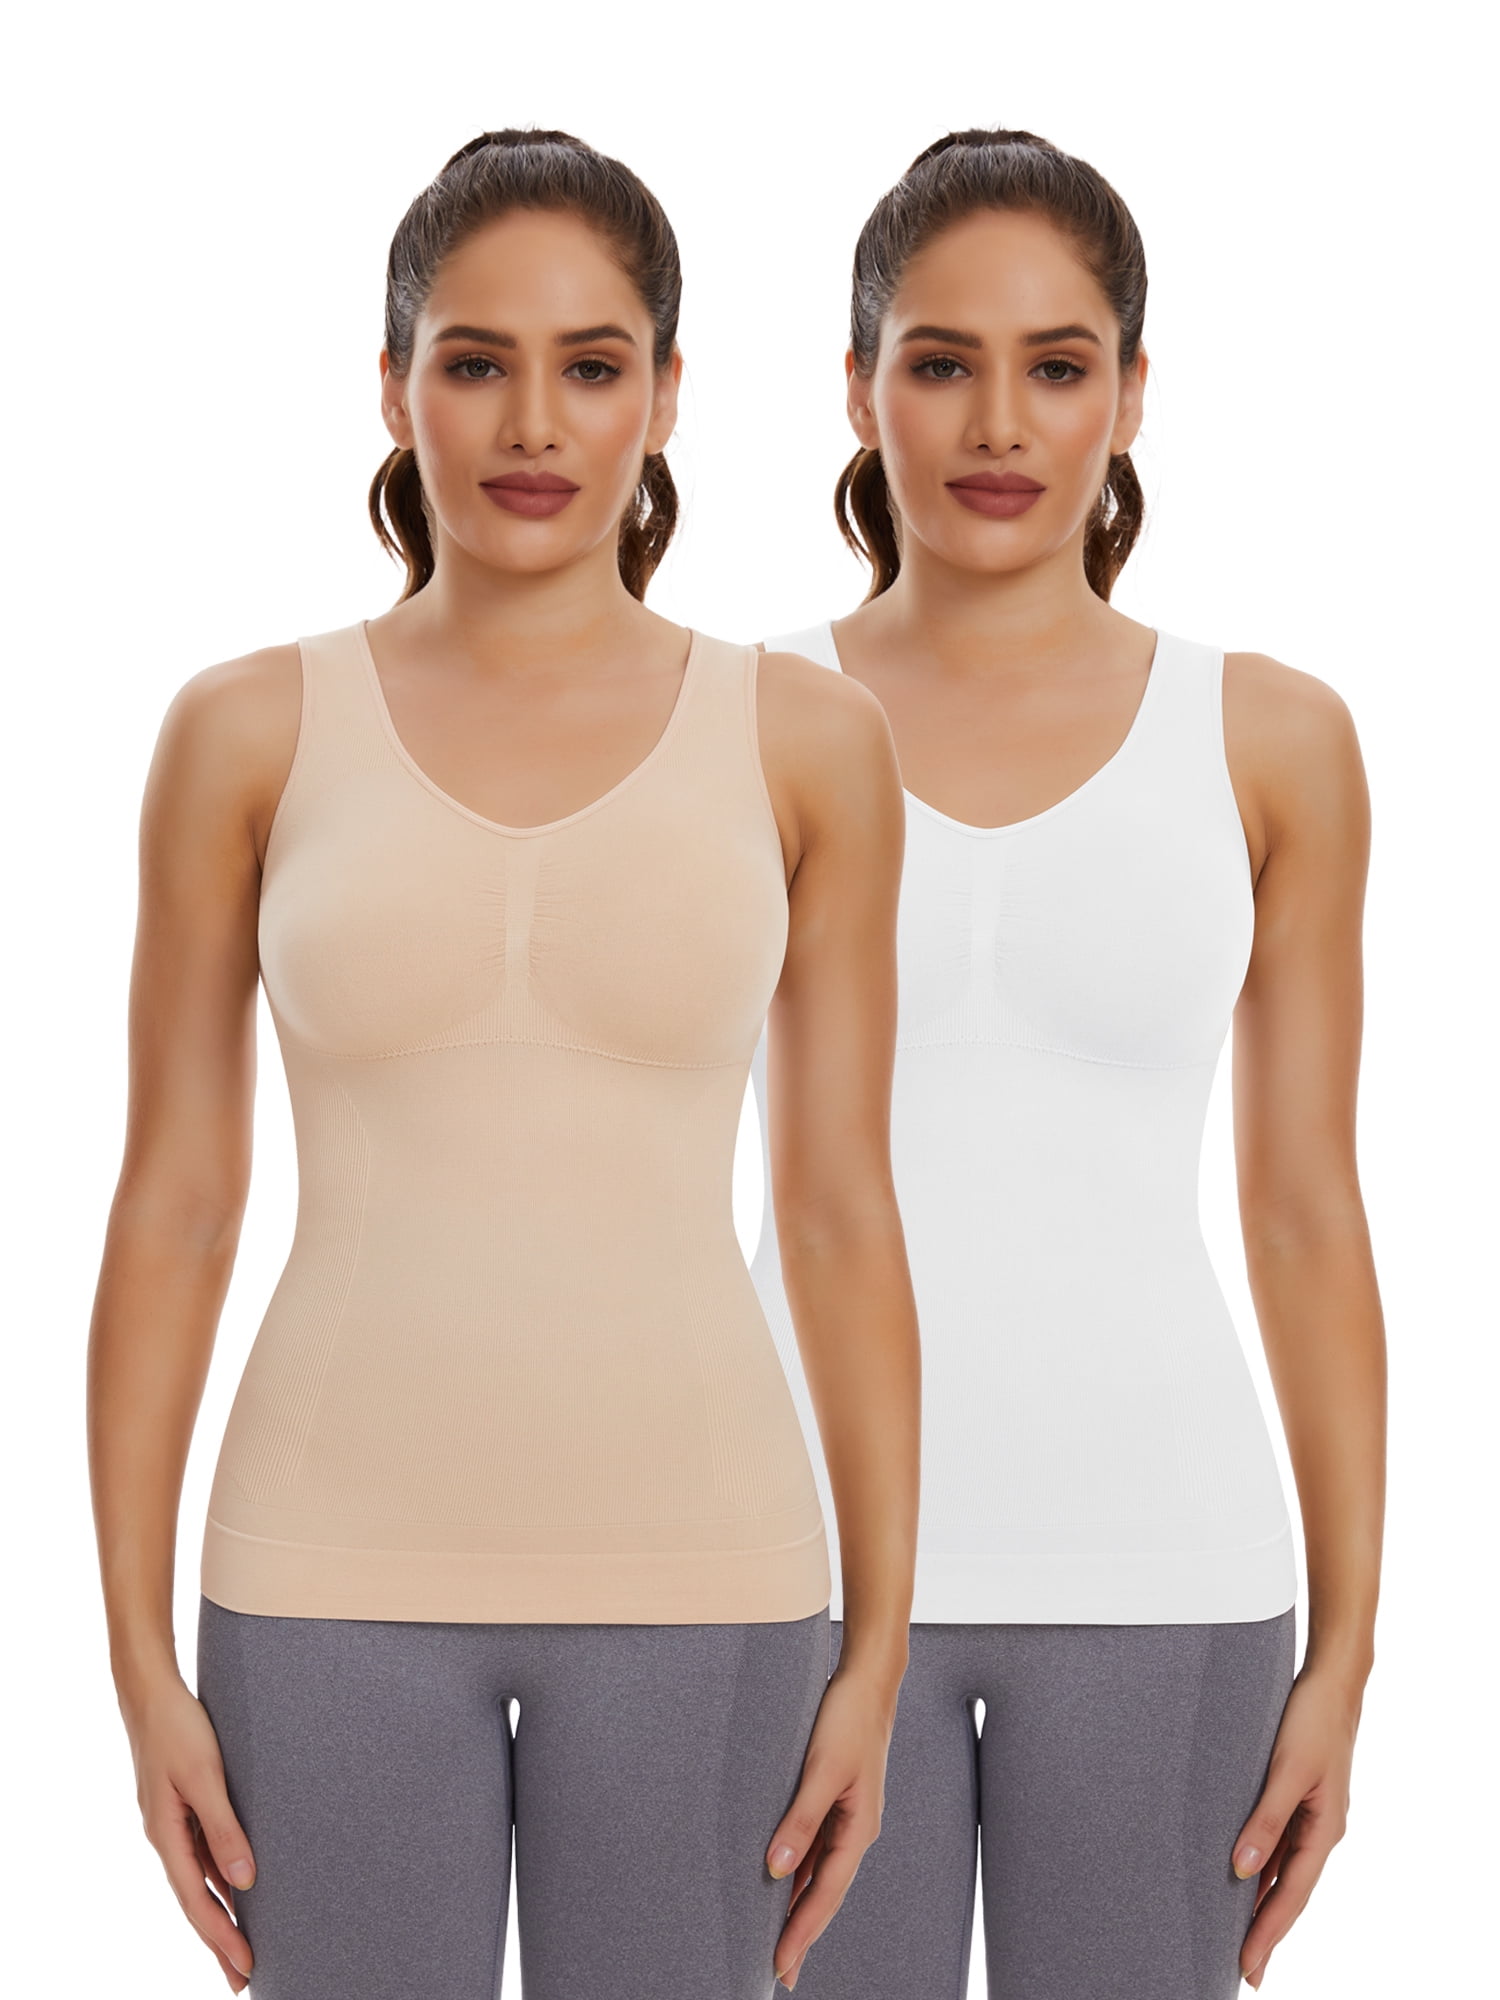 COMFREE Camisoles for Women with Built in Bra Slimming Cami Shaper Tummy  Control Tank Top Shapewear Body Shaper 